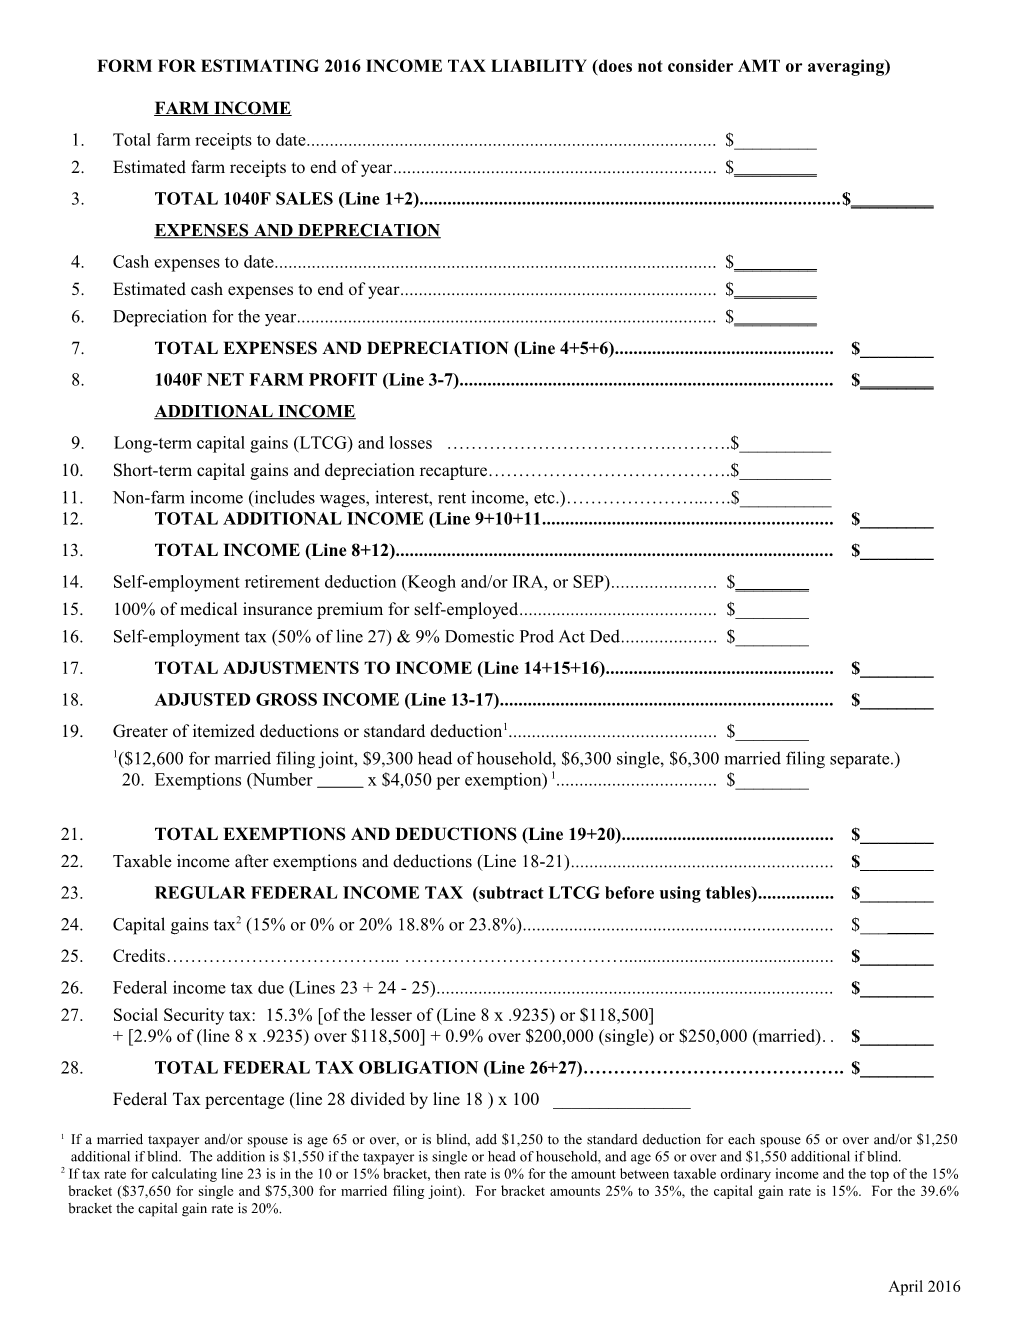 FORM for ESTIMATING 2016 INCOME TAX LIABILITY (Does Not Consider AMT Or Averaging)